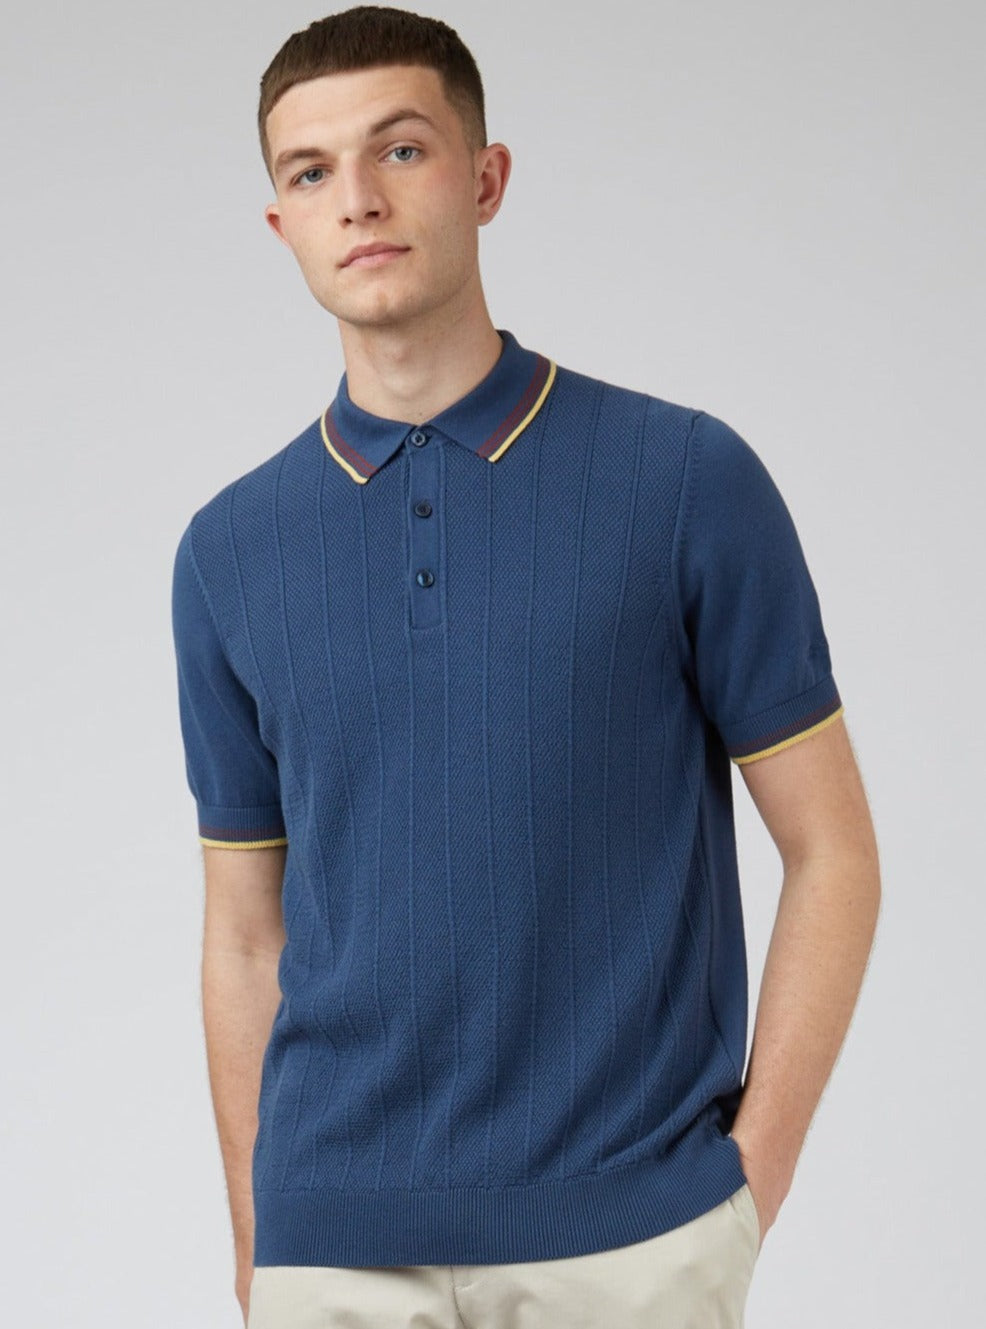 Textured Knit Fitted Polo - Blue Denim - Ben Sherman